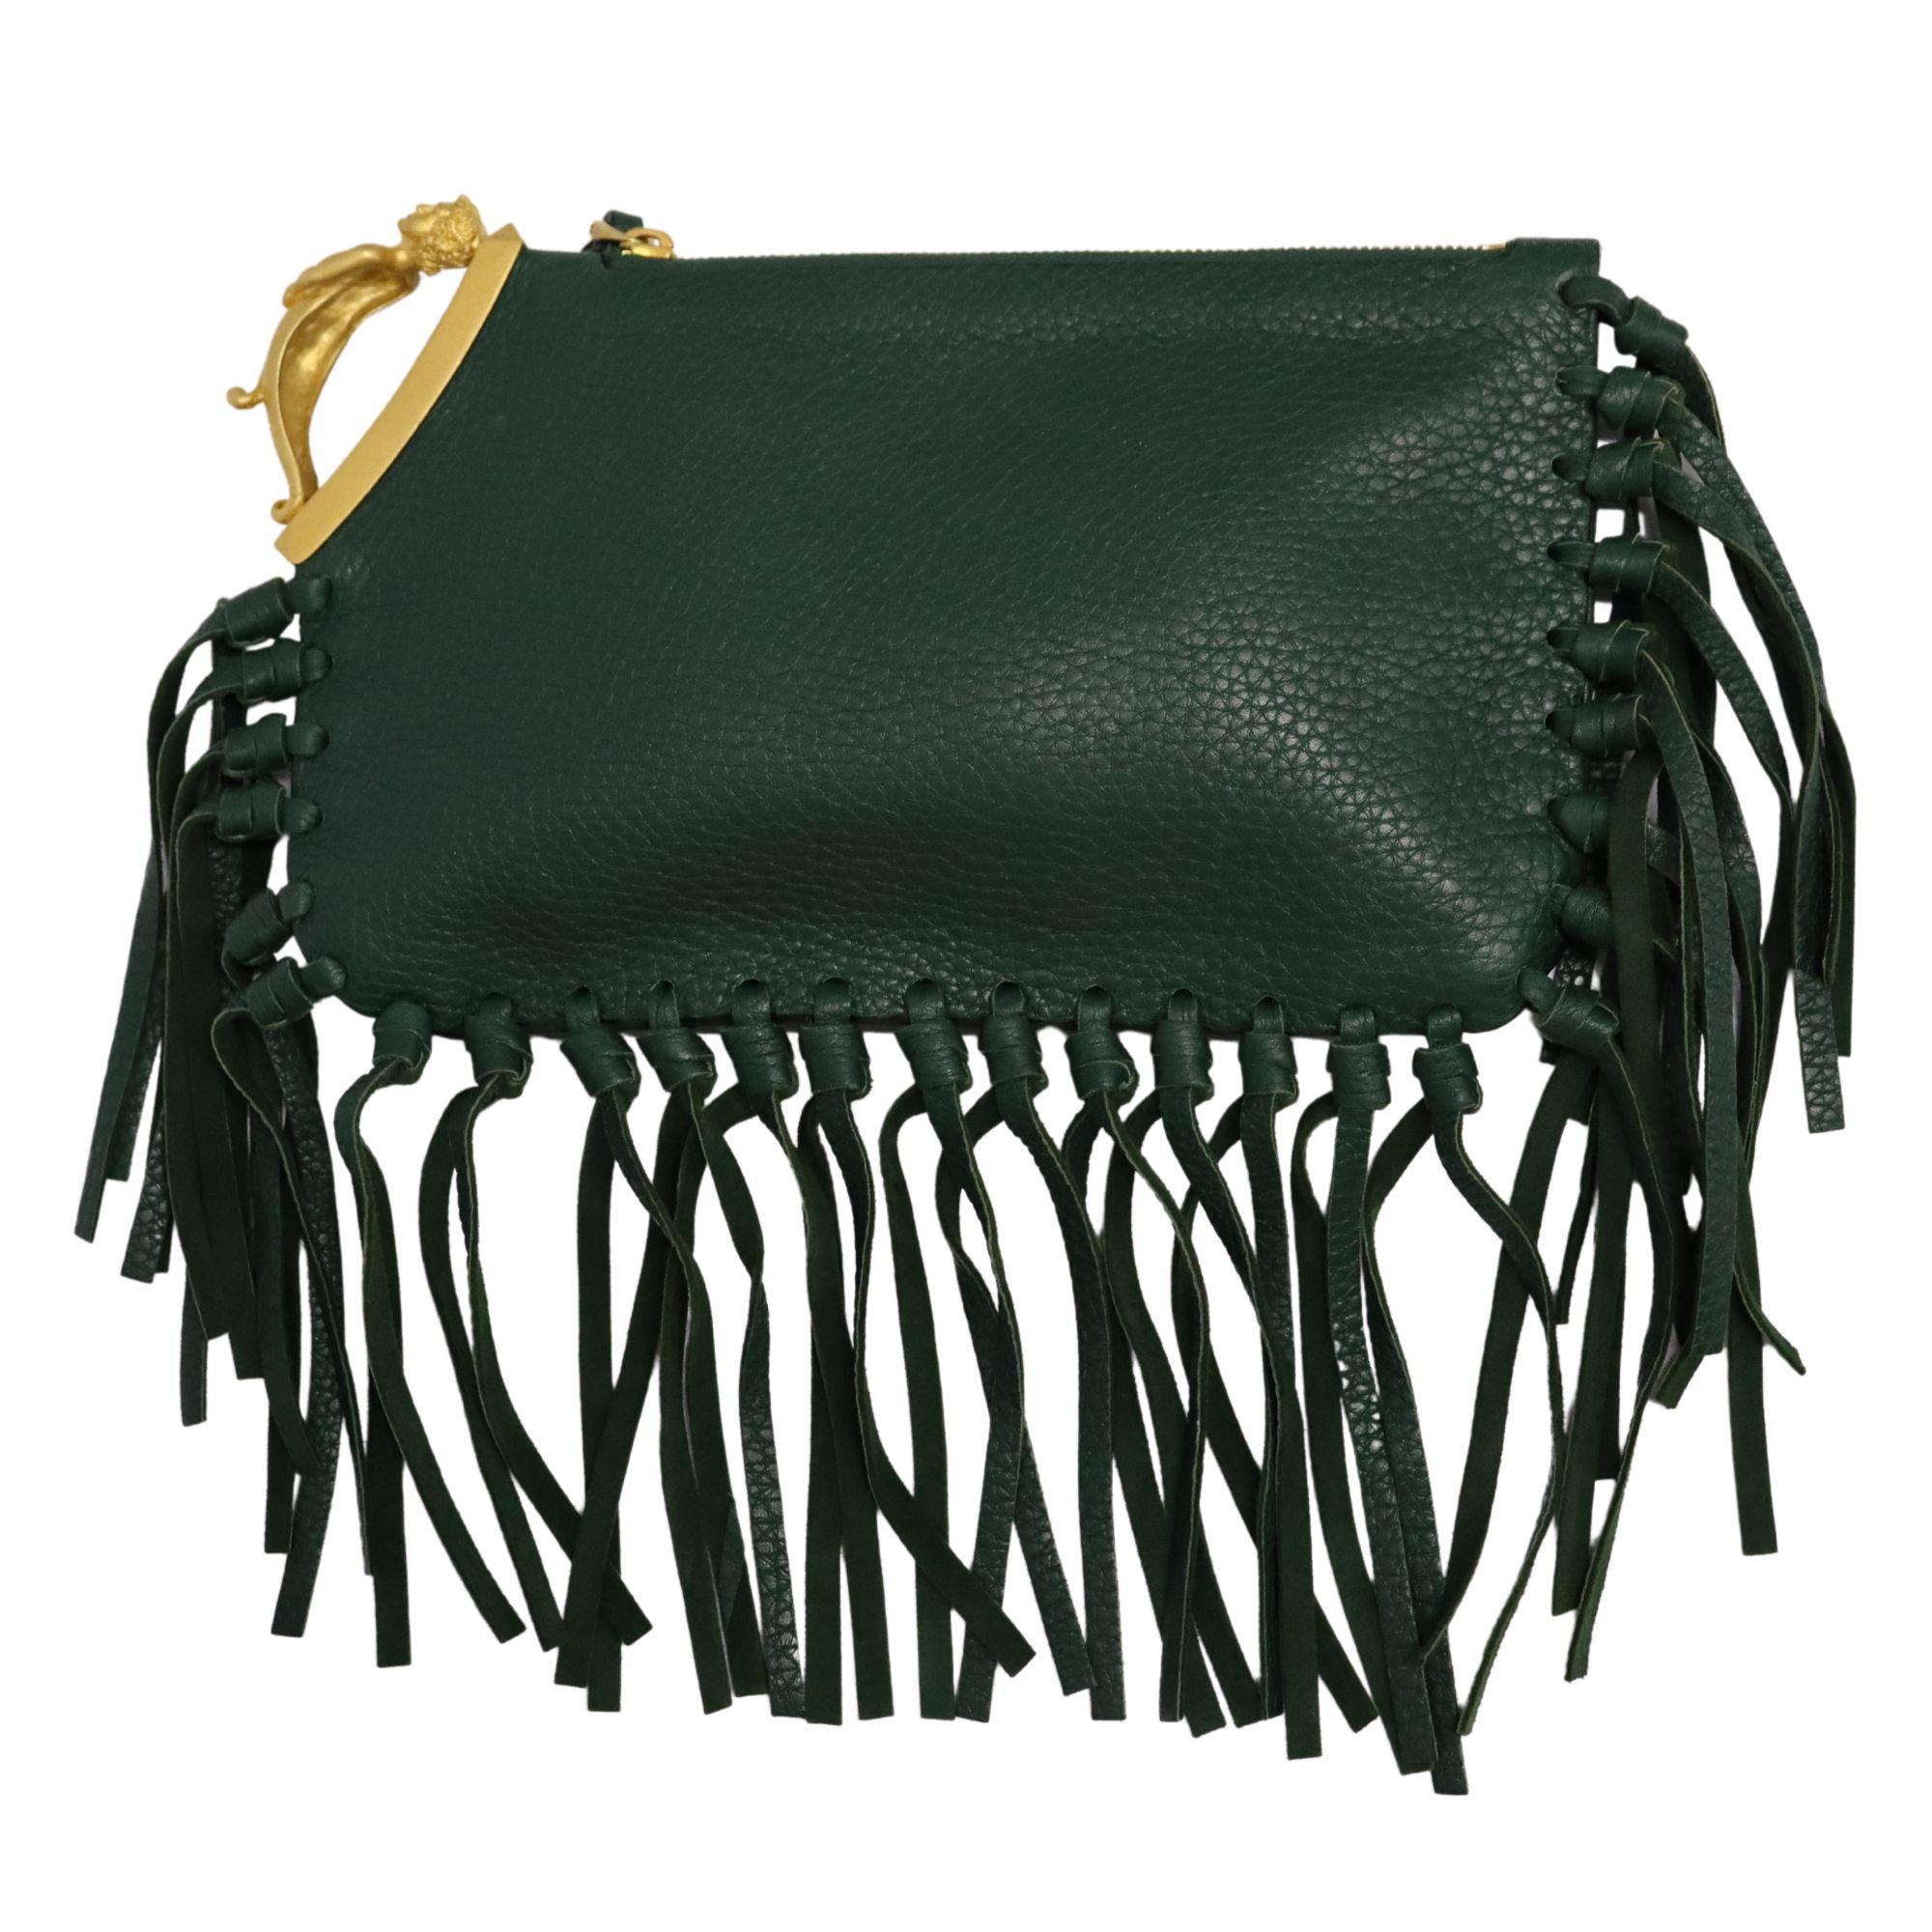 Valentino emerald green C-Rockee fringe clutch, with one slide pocket on the inside, and mermaid gold detail. In excellent condition. Gold scarab at corner for the perfect finger handle. Opens to green suede interior.

Measurements: (Approx)
Height: